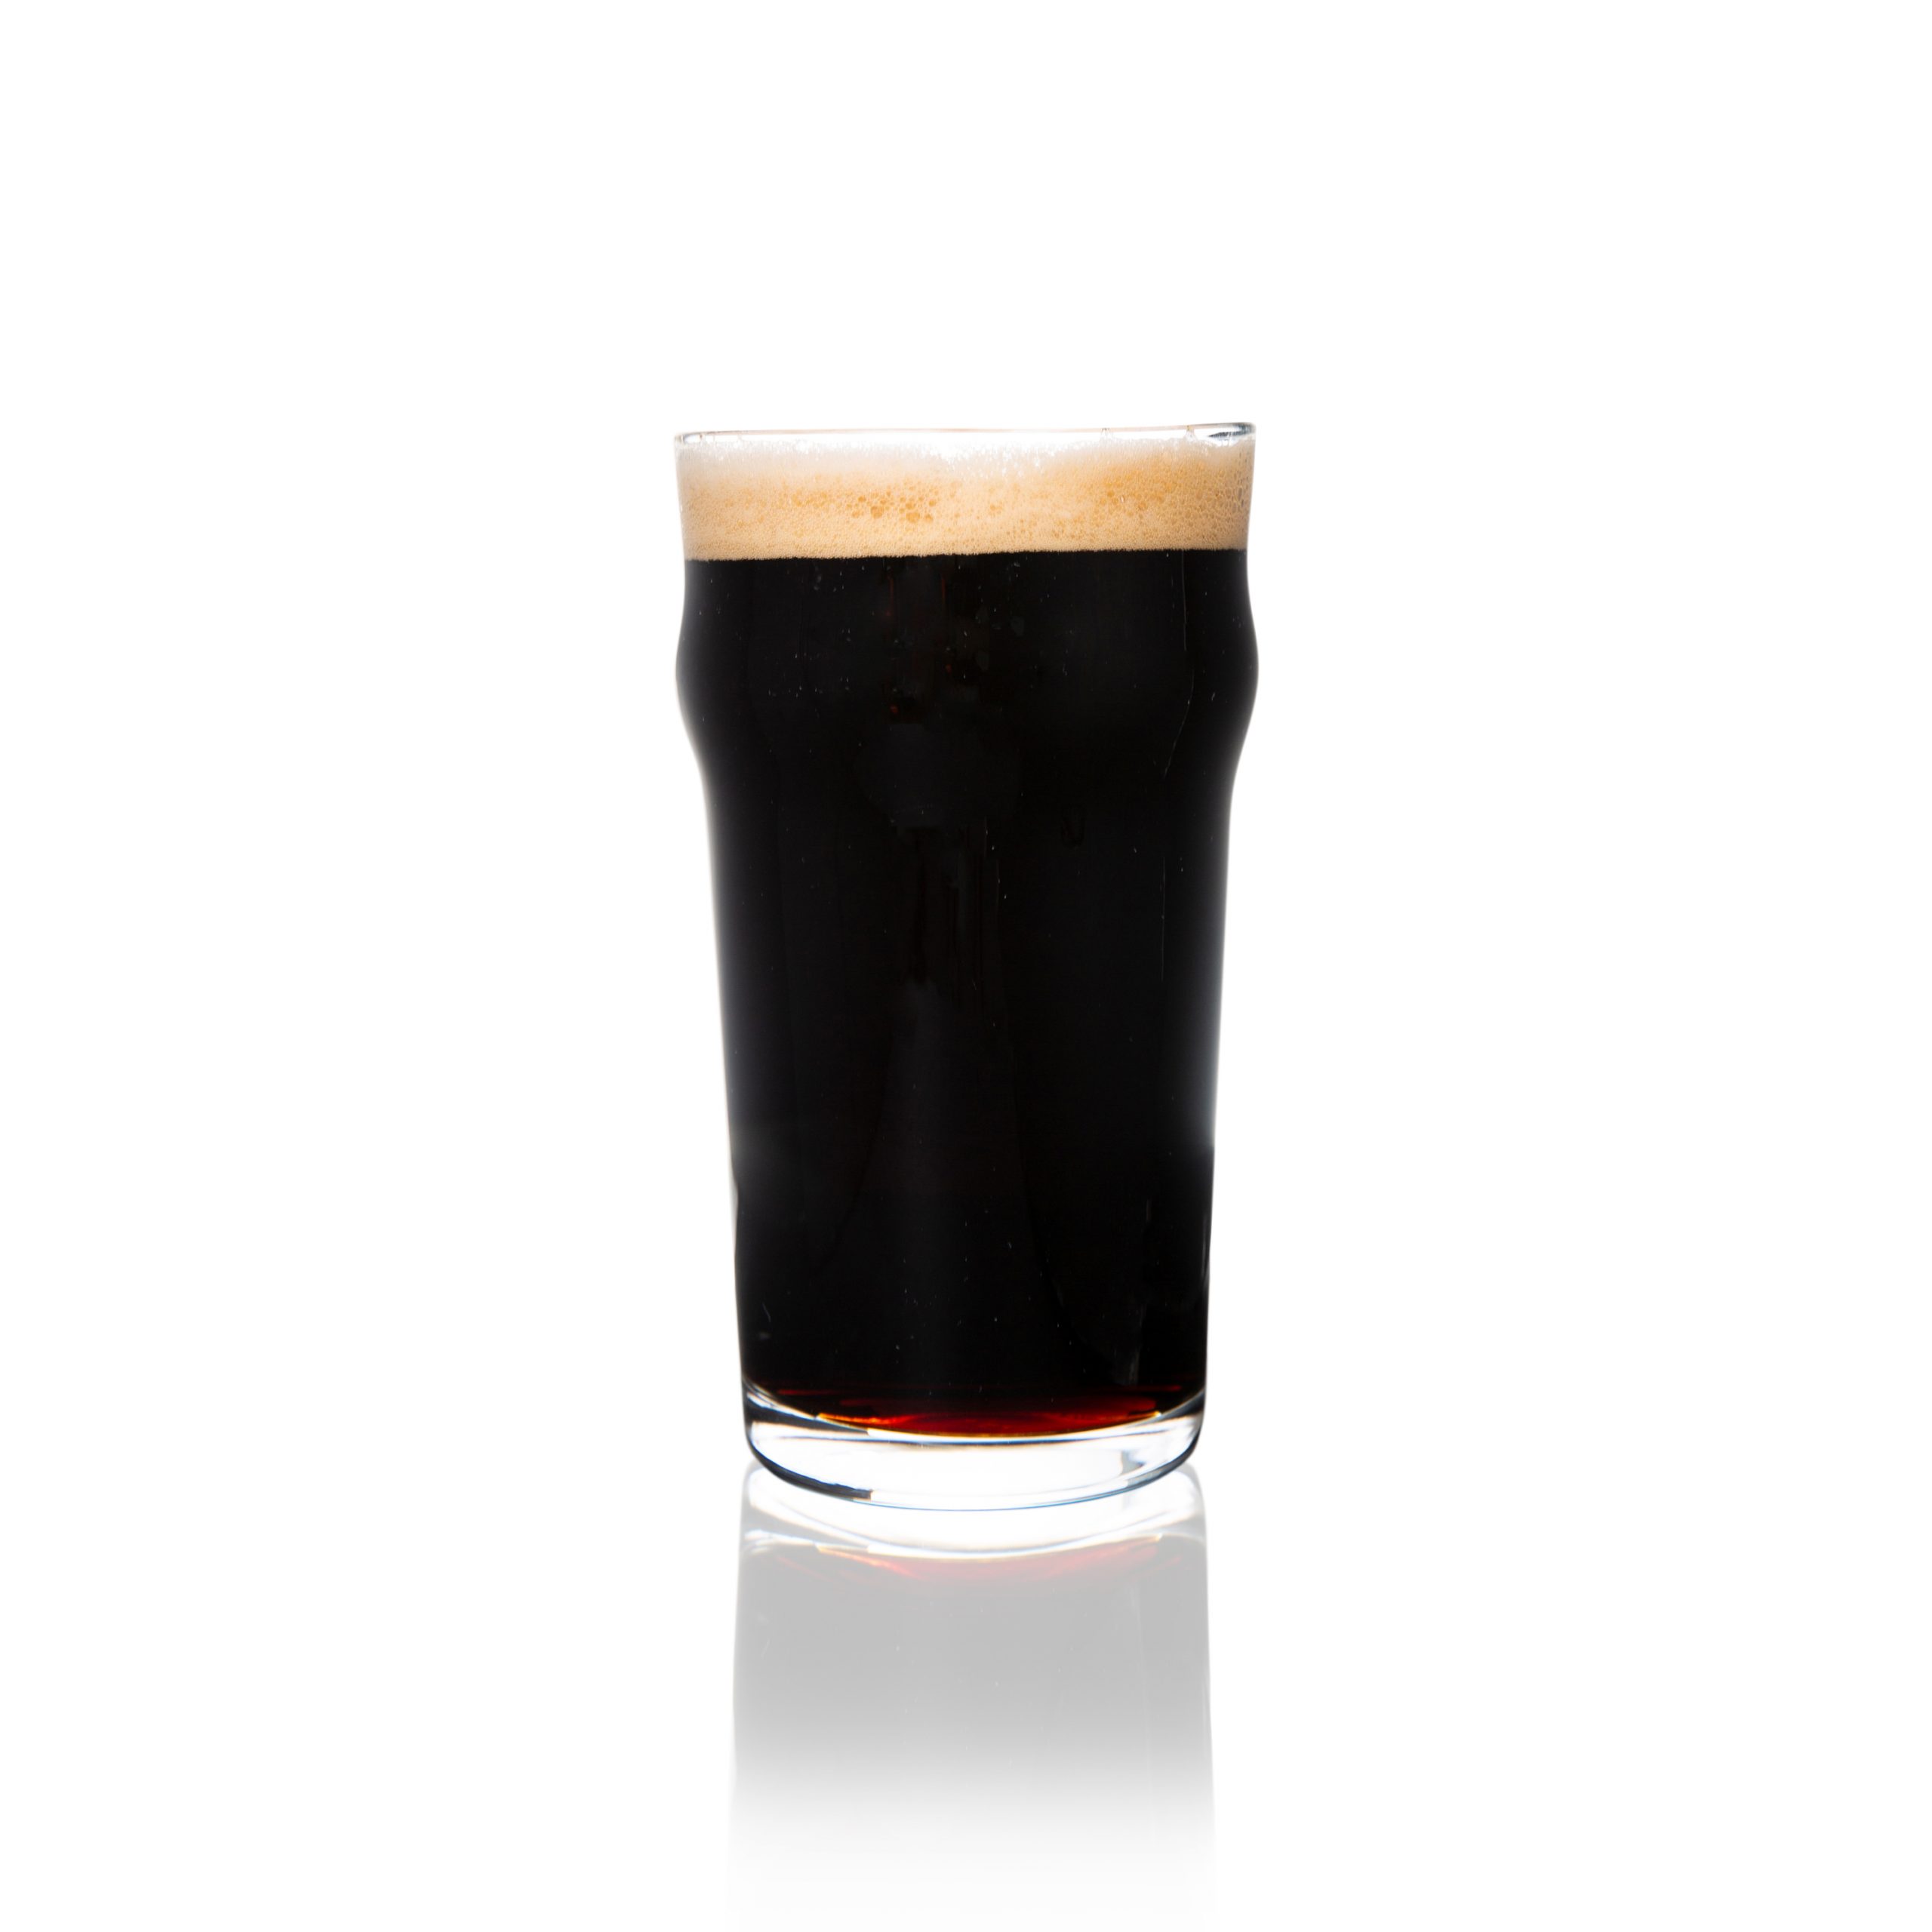 https://www.craftmastergrowlers.com/wp-content/uploads/2020/07/19oz-conic-british-pint-glass-stout-scaled.jpg